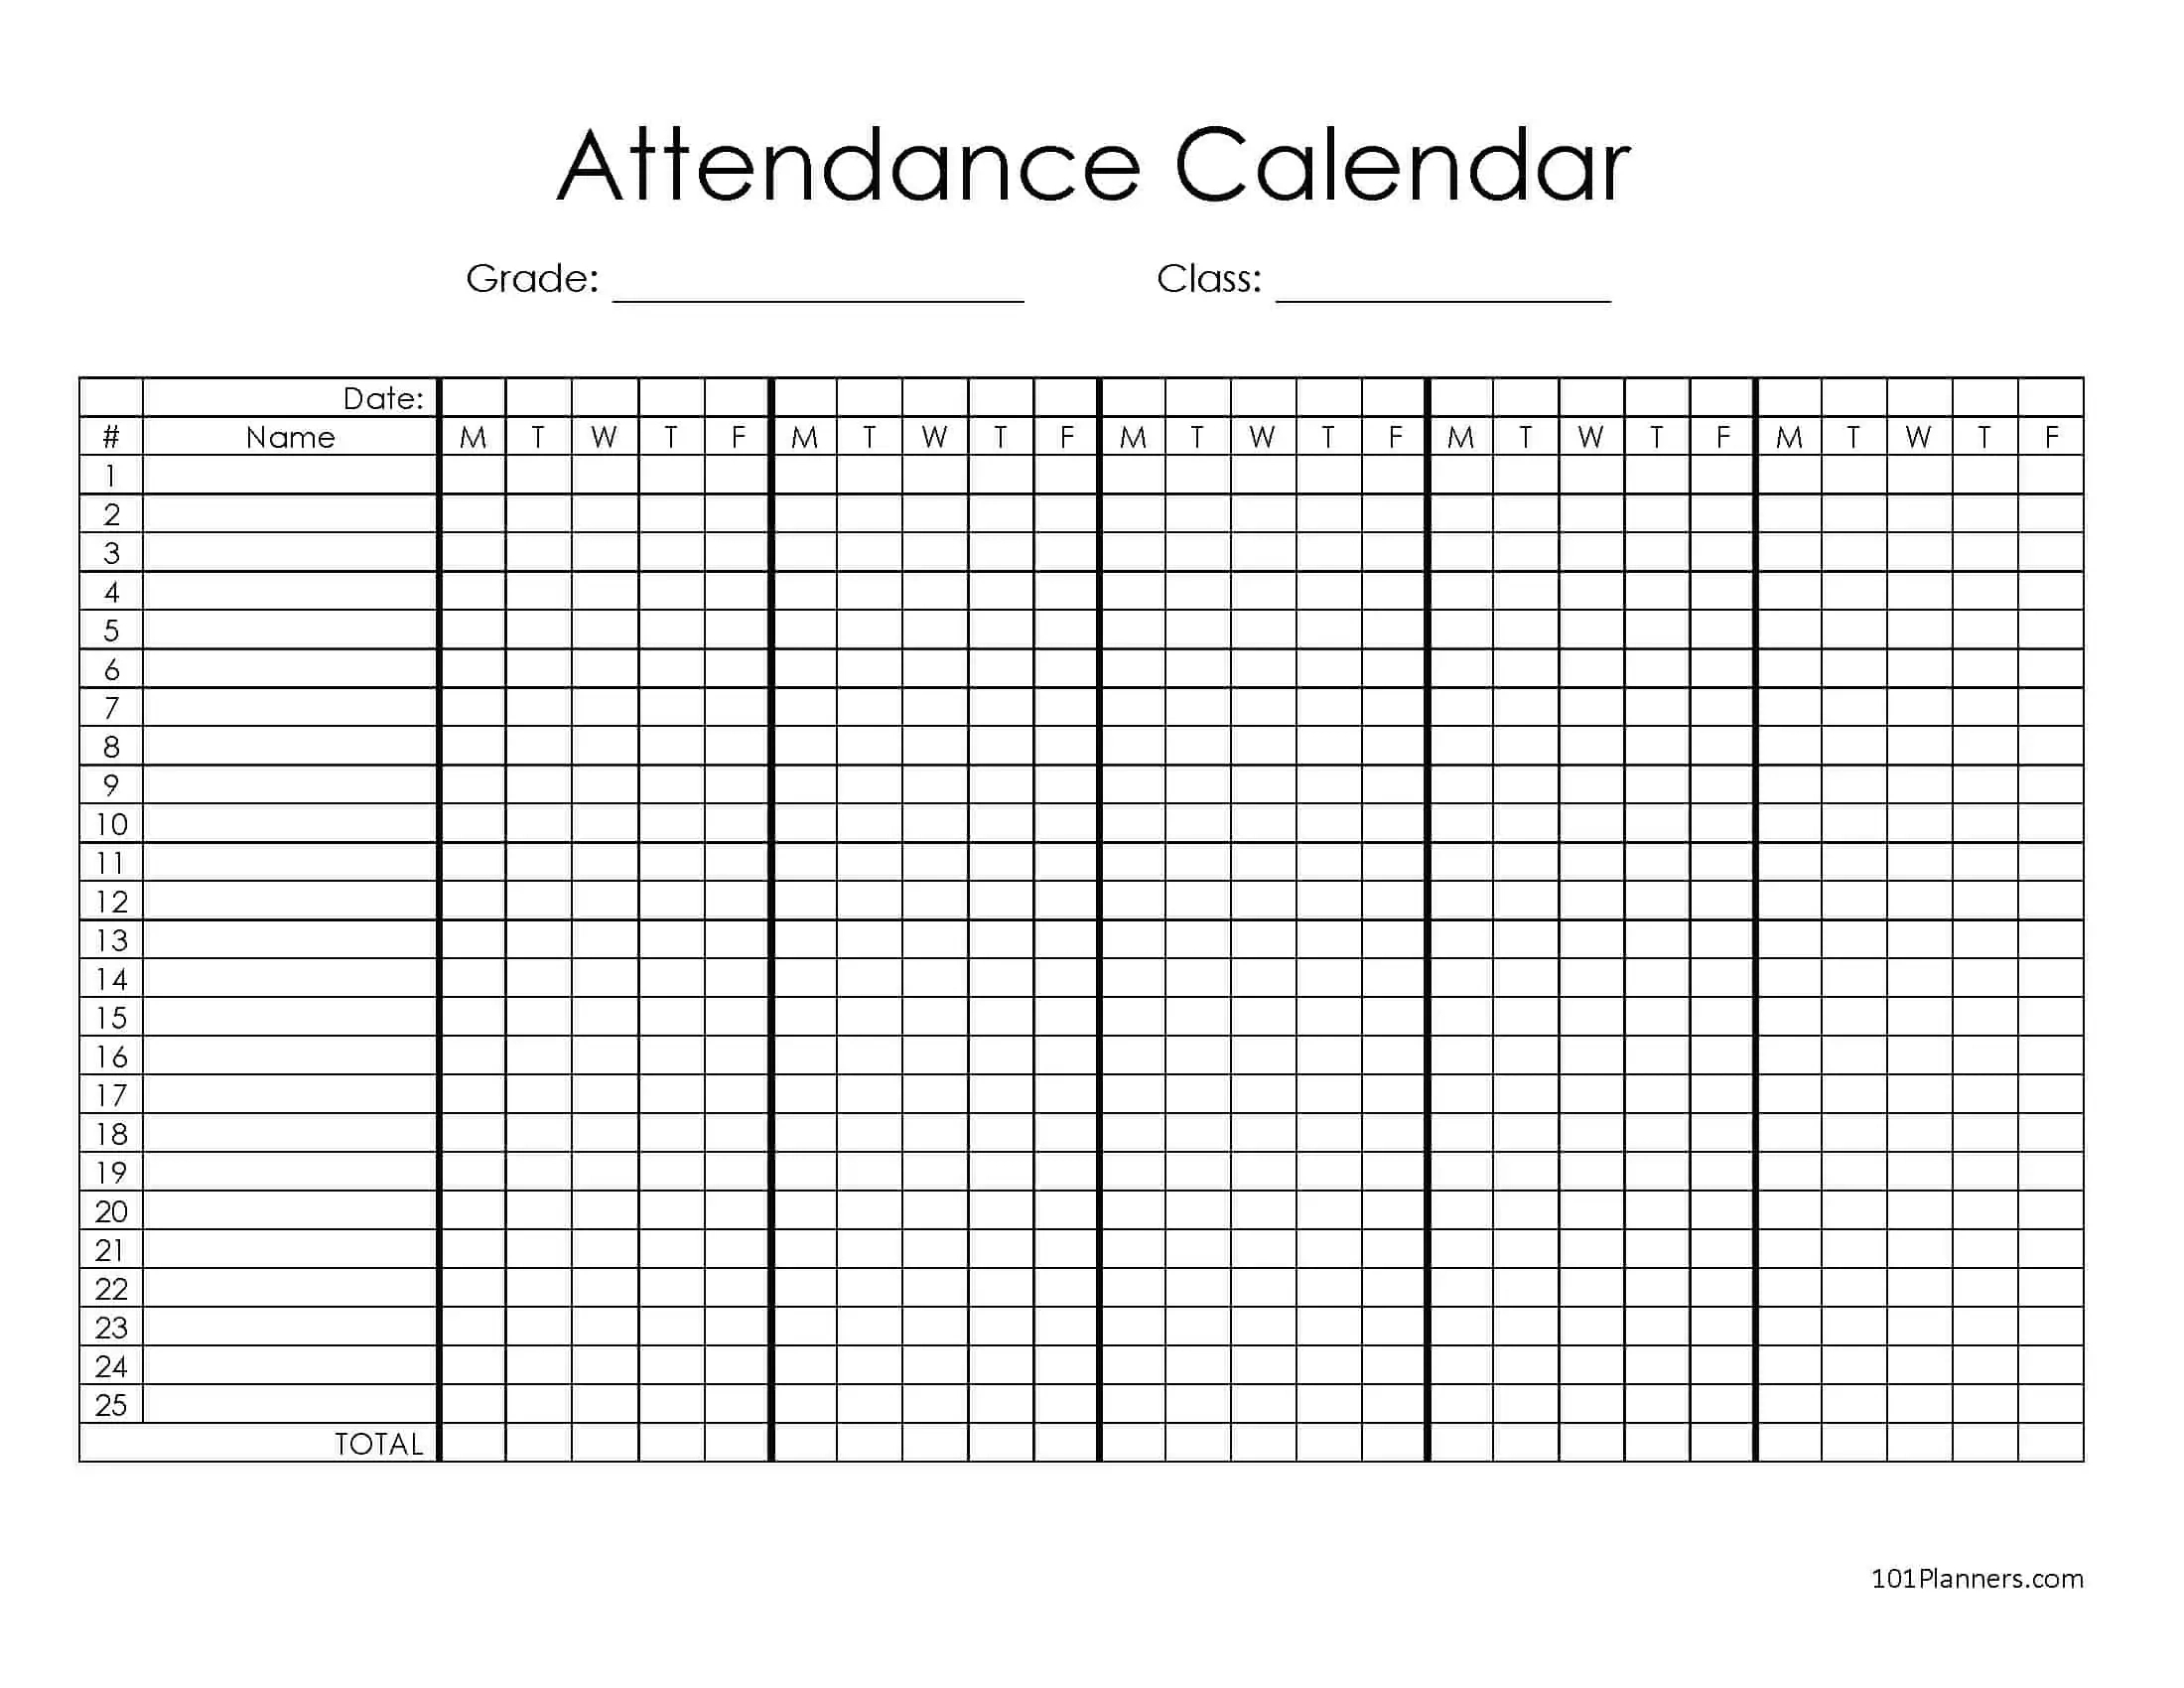 Free Attendance Sheet Template | Word, Pdf, Excel &amp;amp; Image regarding Free Printable Attendance Forms For Teachers